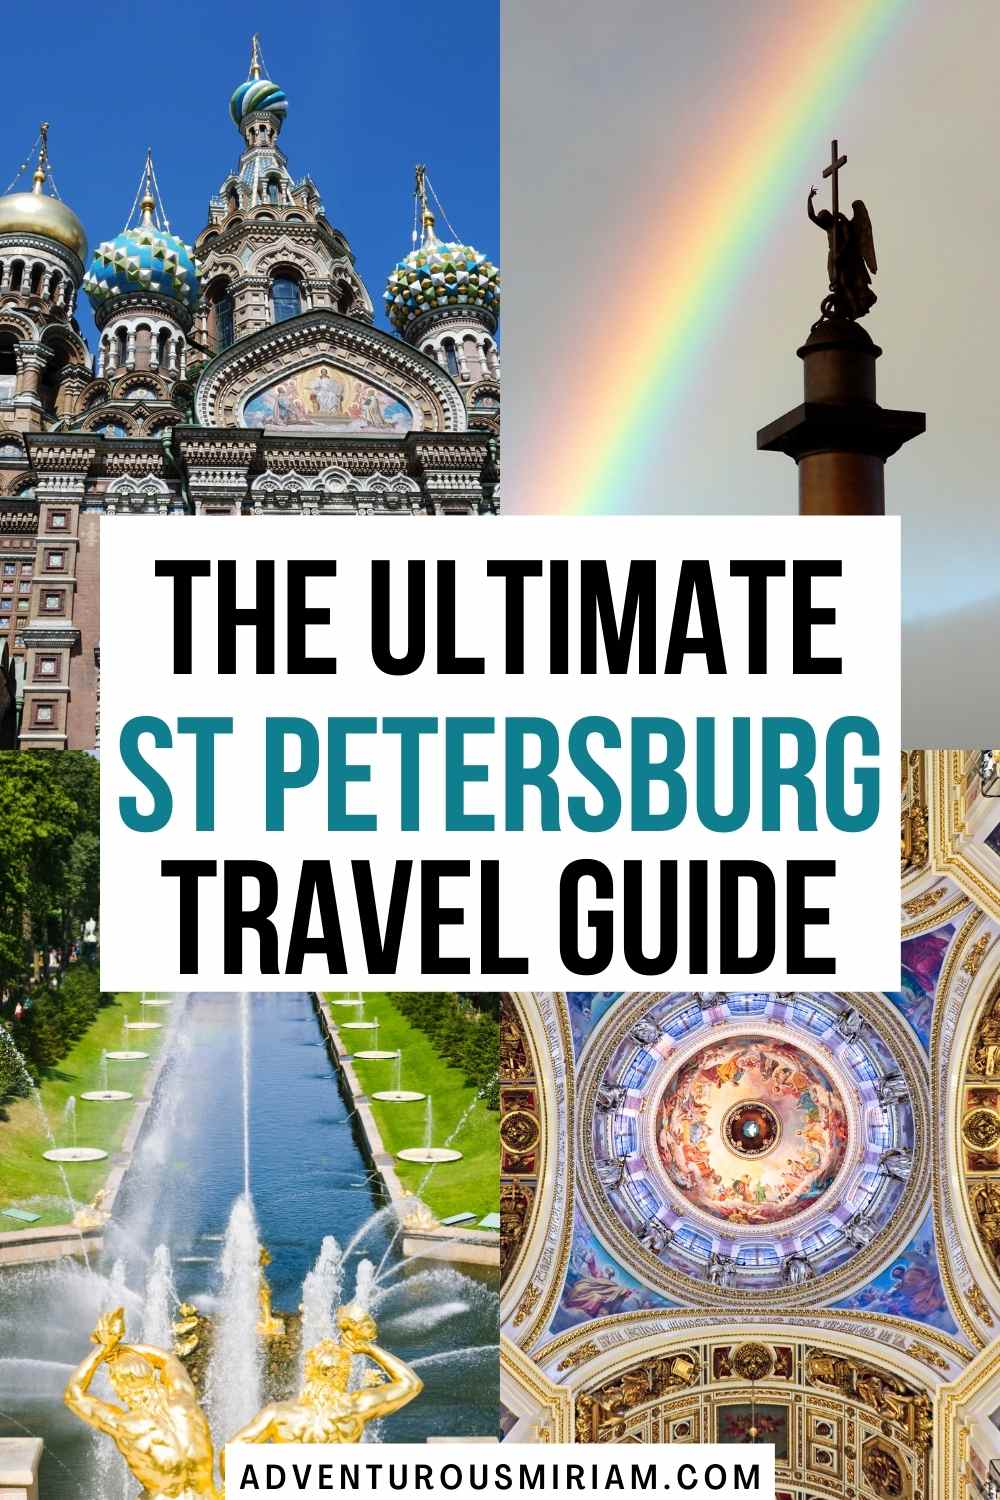 Are you heading to Russia and wondering what to expect? Here's what you need to know + the top things to see and do in St. Petersburg, Russia. st petersburg travel blog. what to do in st petersburg russia. places to visit in st petersburg. st petersburg travel. st petersburg russia vacations. where to go in saint petersburg. things to do in st petersburg russia. st petersburg russia travel tips. st petersburg russia attractions. what to see in st. petersburg. st petersburg russia things to do. st petersburg russia points of interest.